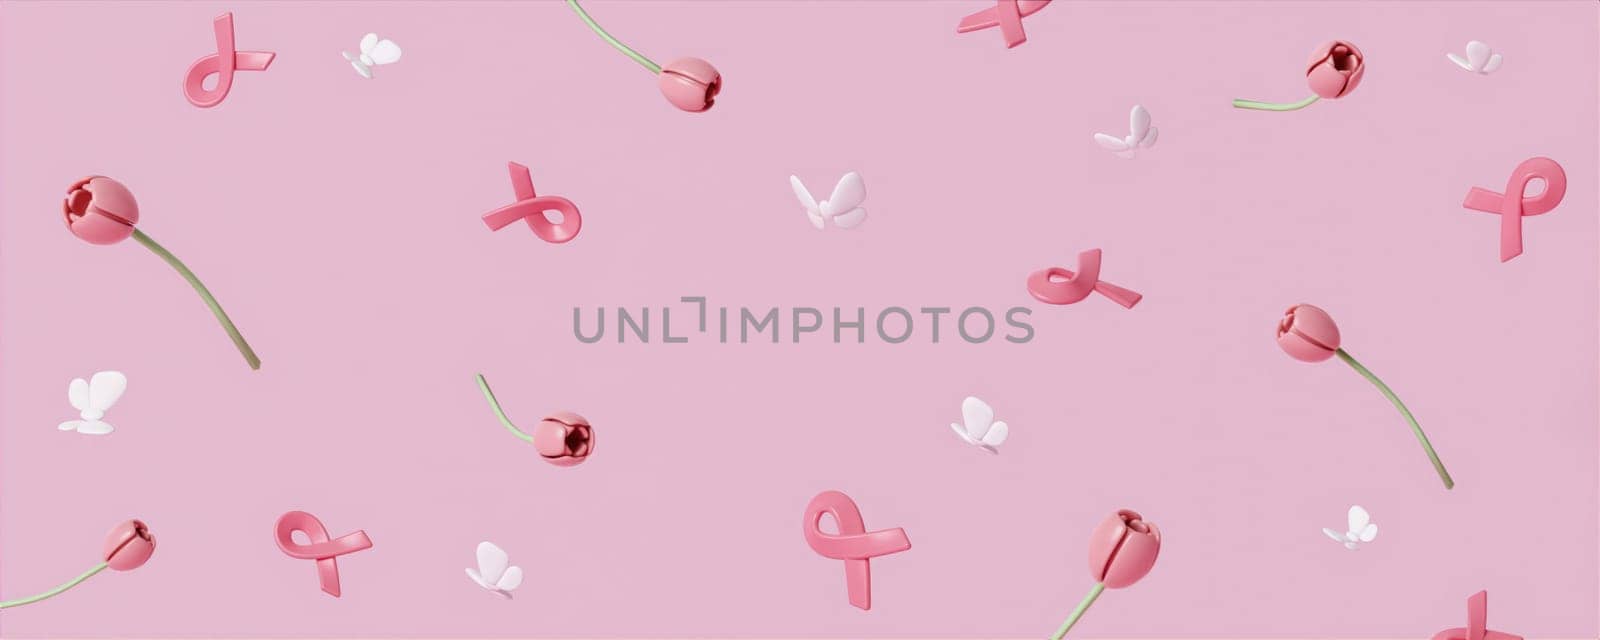 pink ribbon with flowers and space for world Cancer Awareness Month and World Cancer Day banner background design in 3D illustration. by meepiangraphic